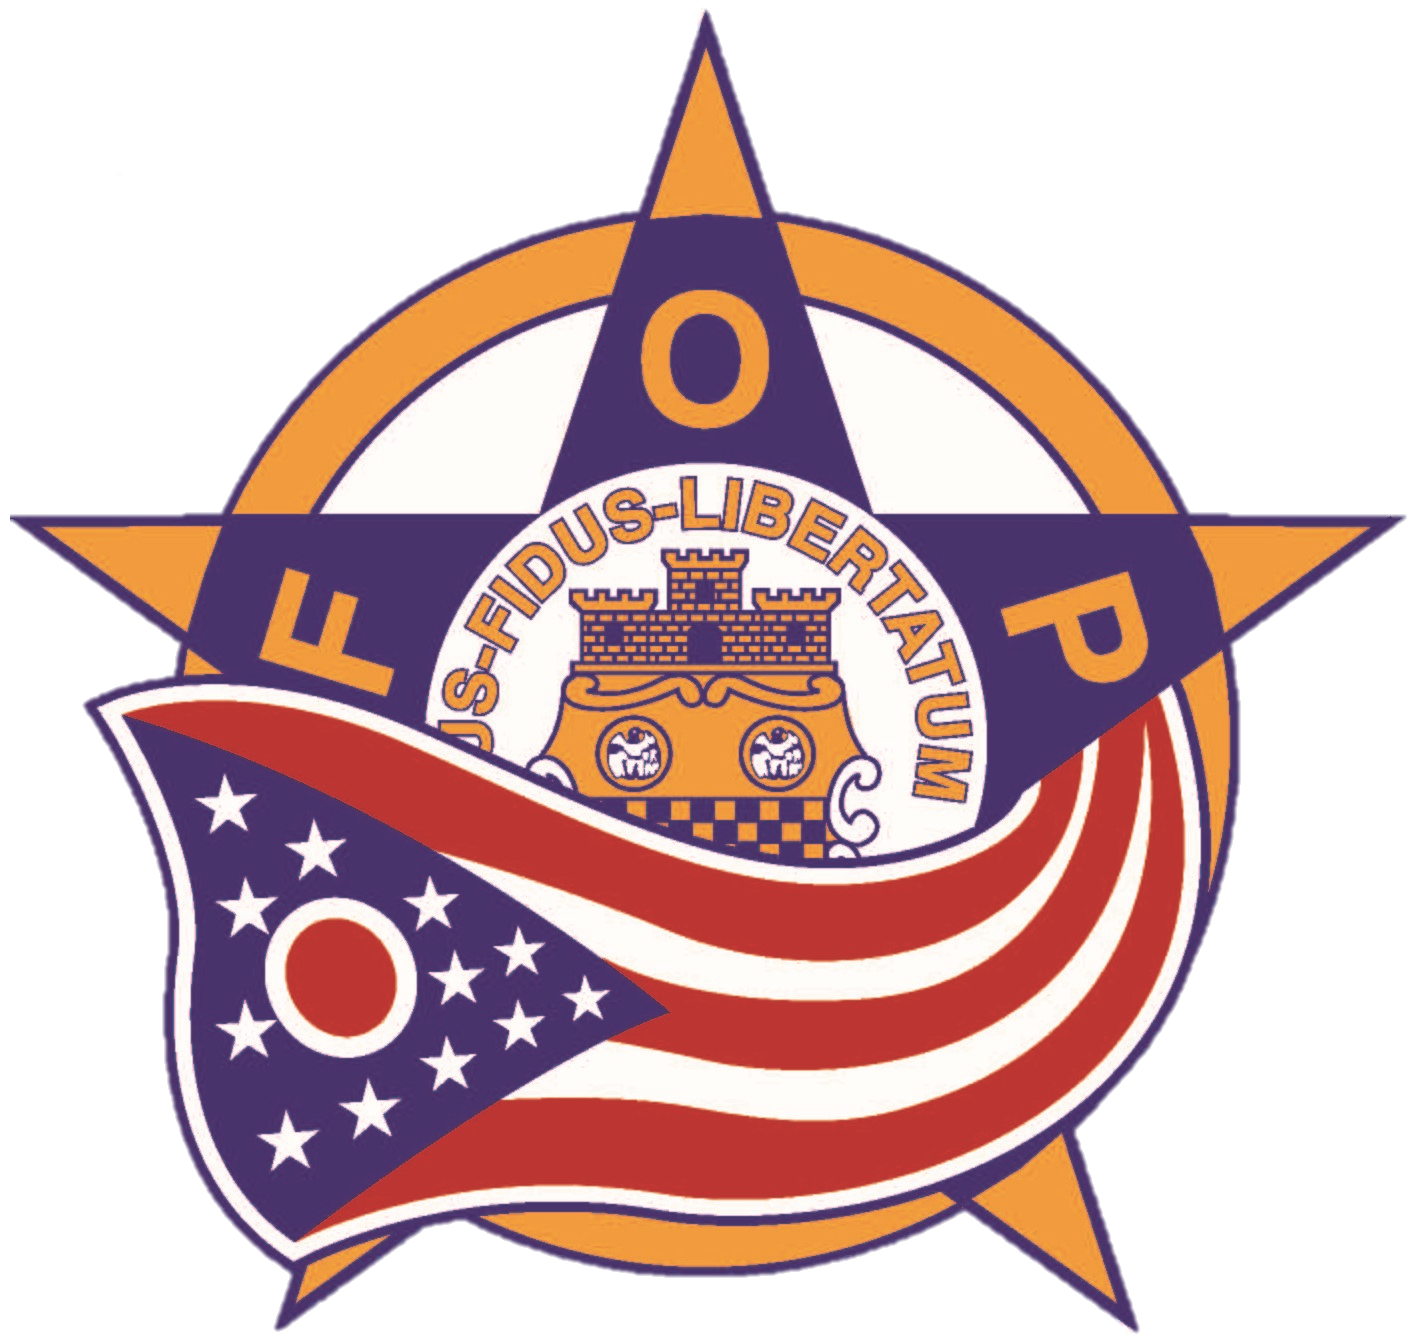 The Fraternal Order of Police of Ohio